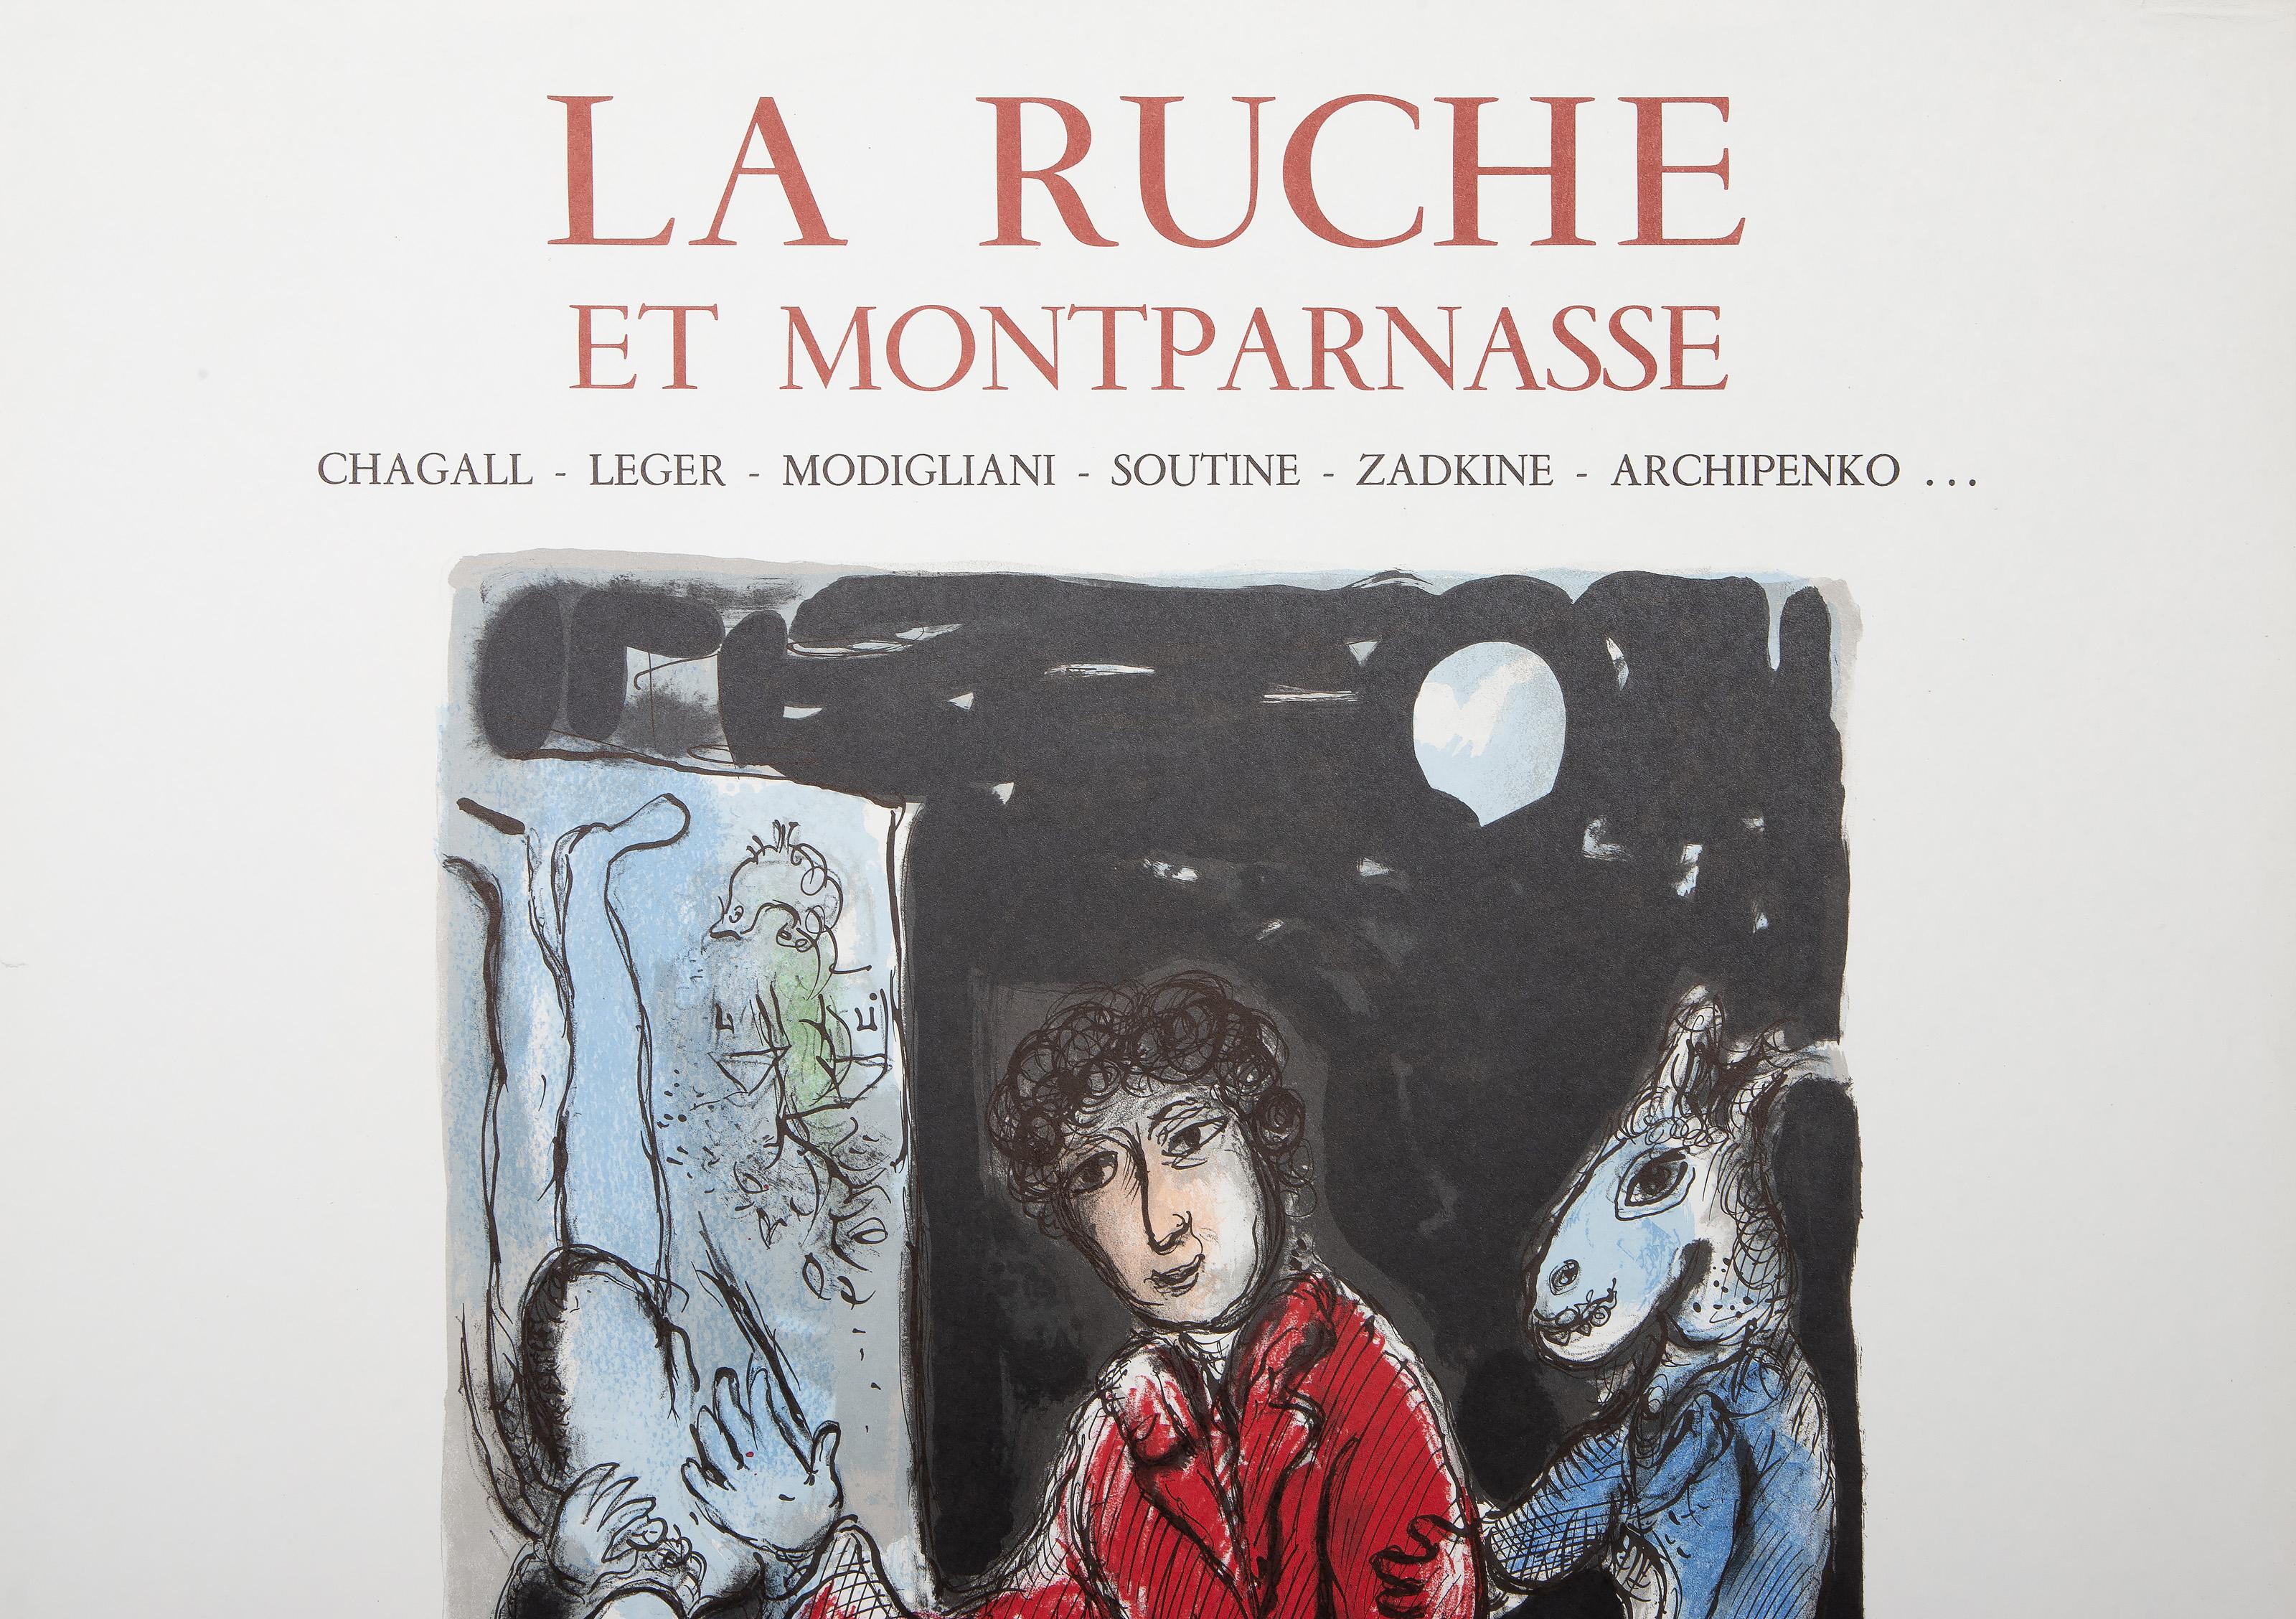 Musee Jacquemart - Andre, Lithograph Poster by Marc Chagall For Sale 3